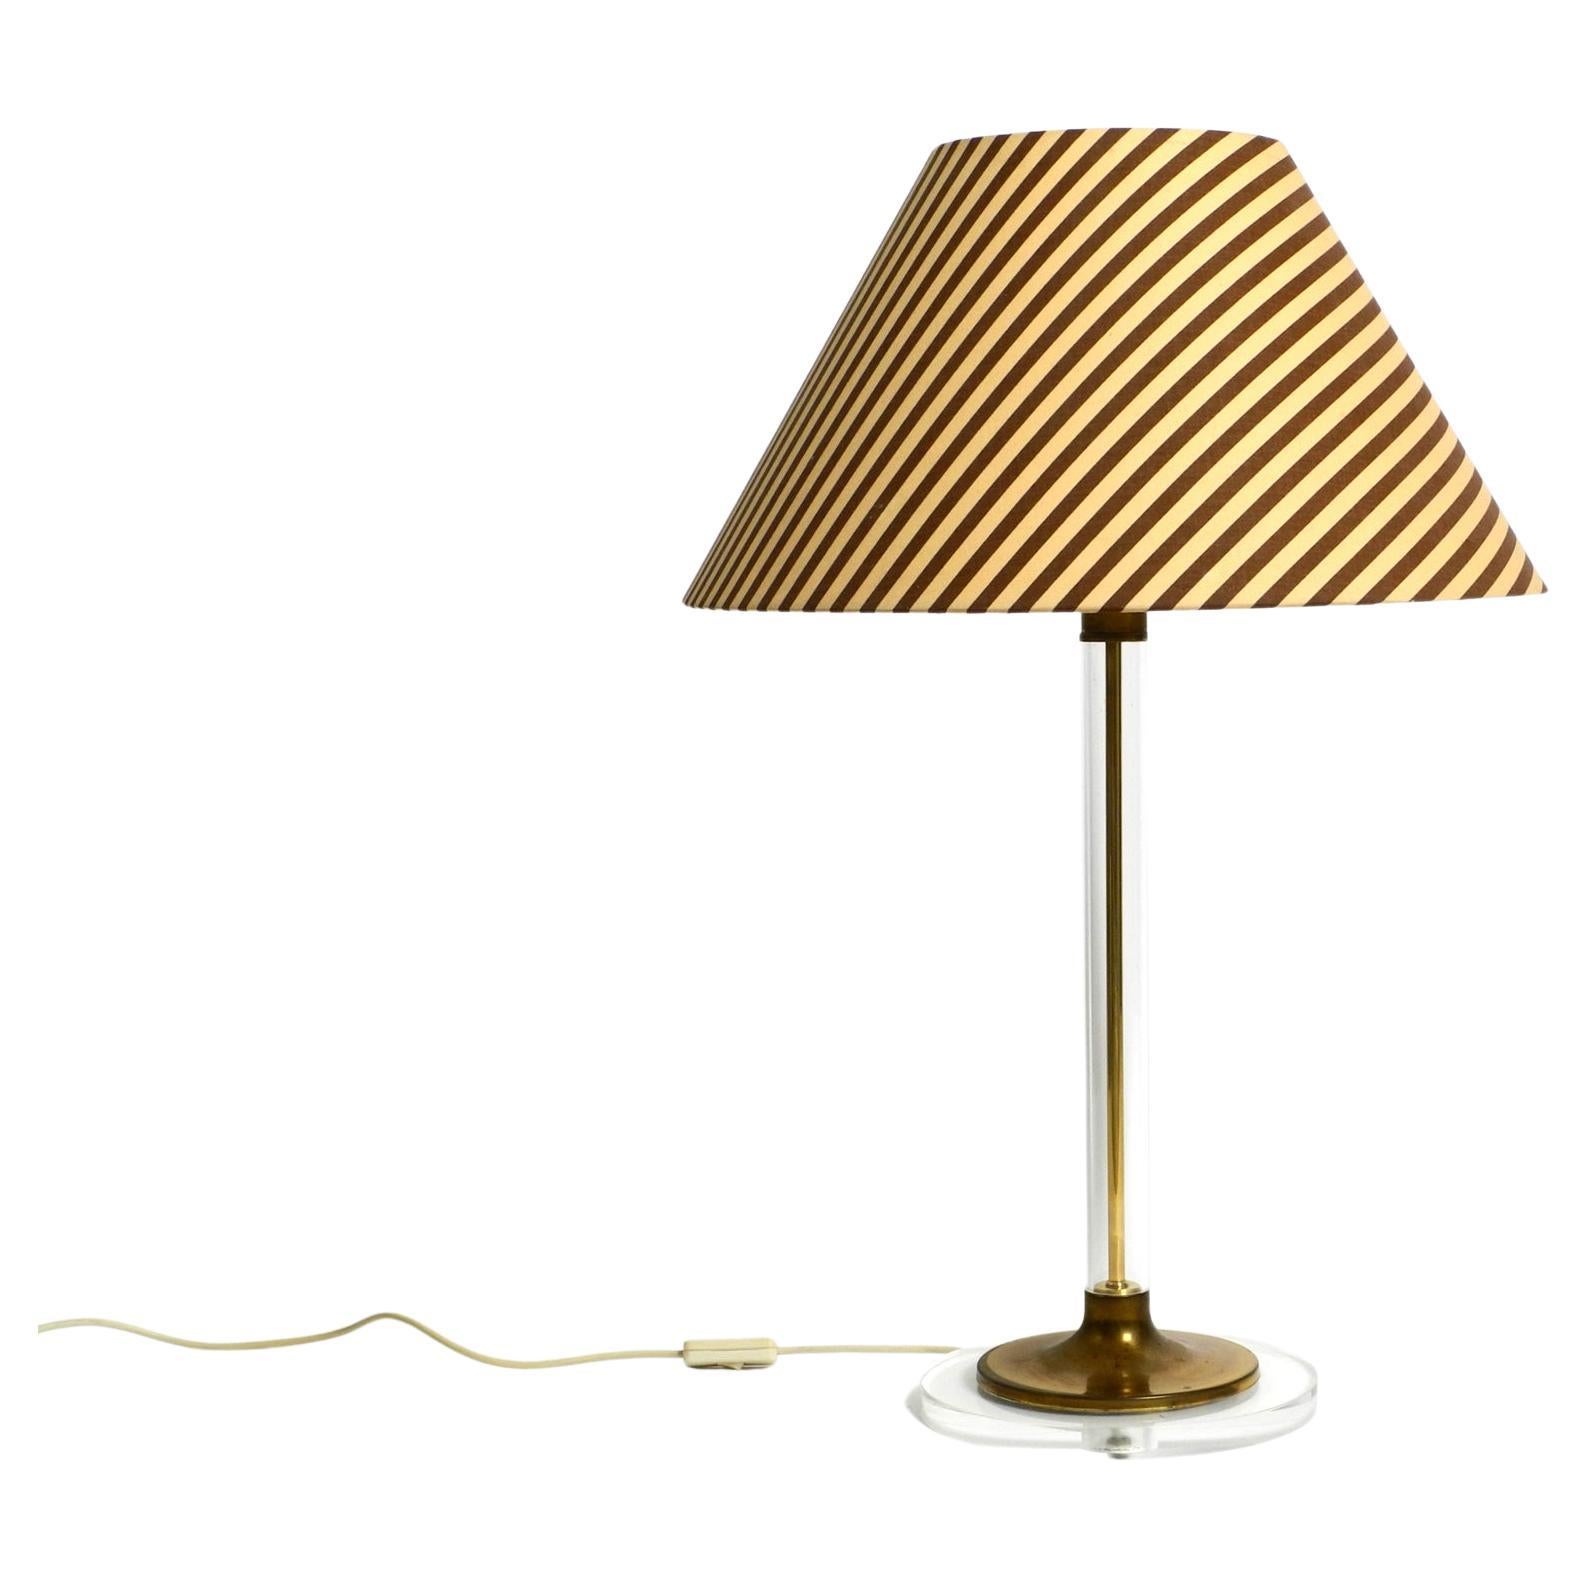 Large plexiglass and brass table lamp from the 1970s by Vereinigte Werkstätten